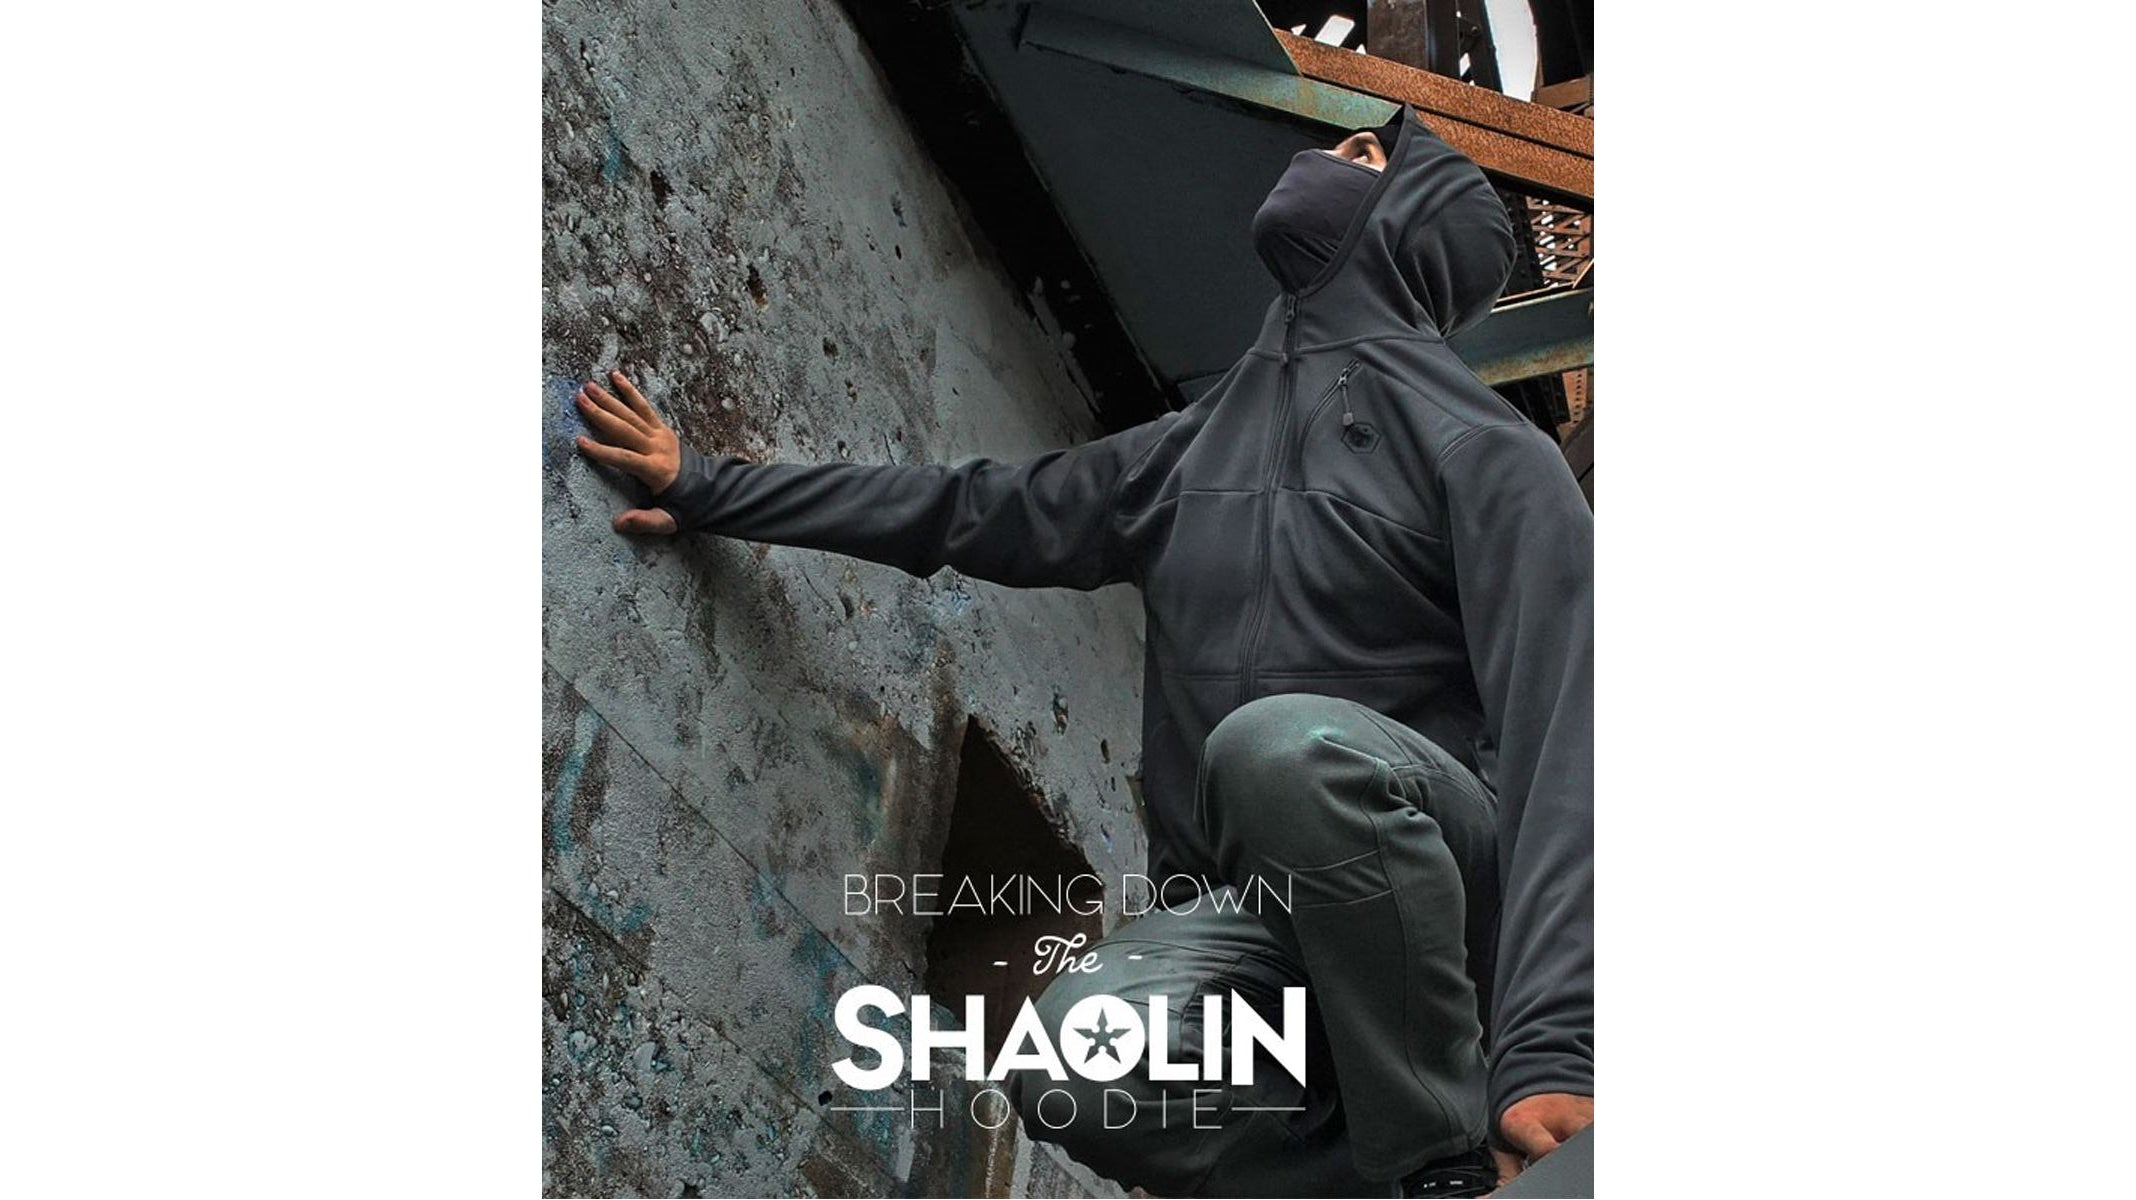 Shaolin Hoodie! All about the Details...